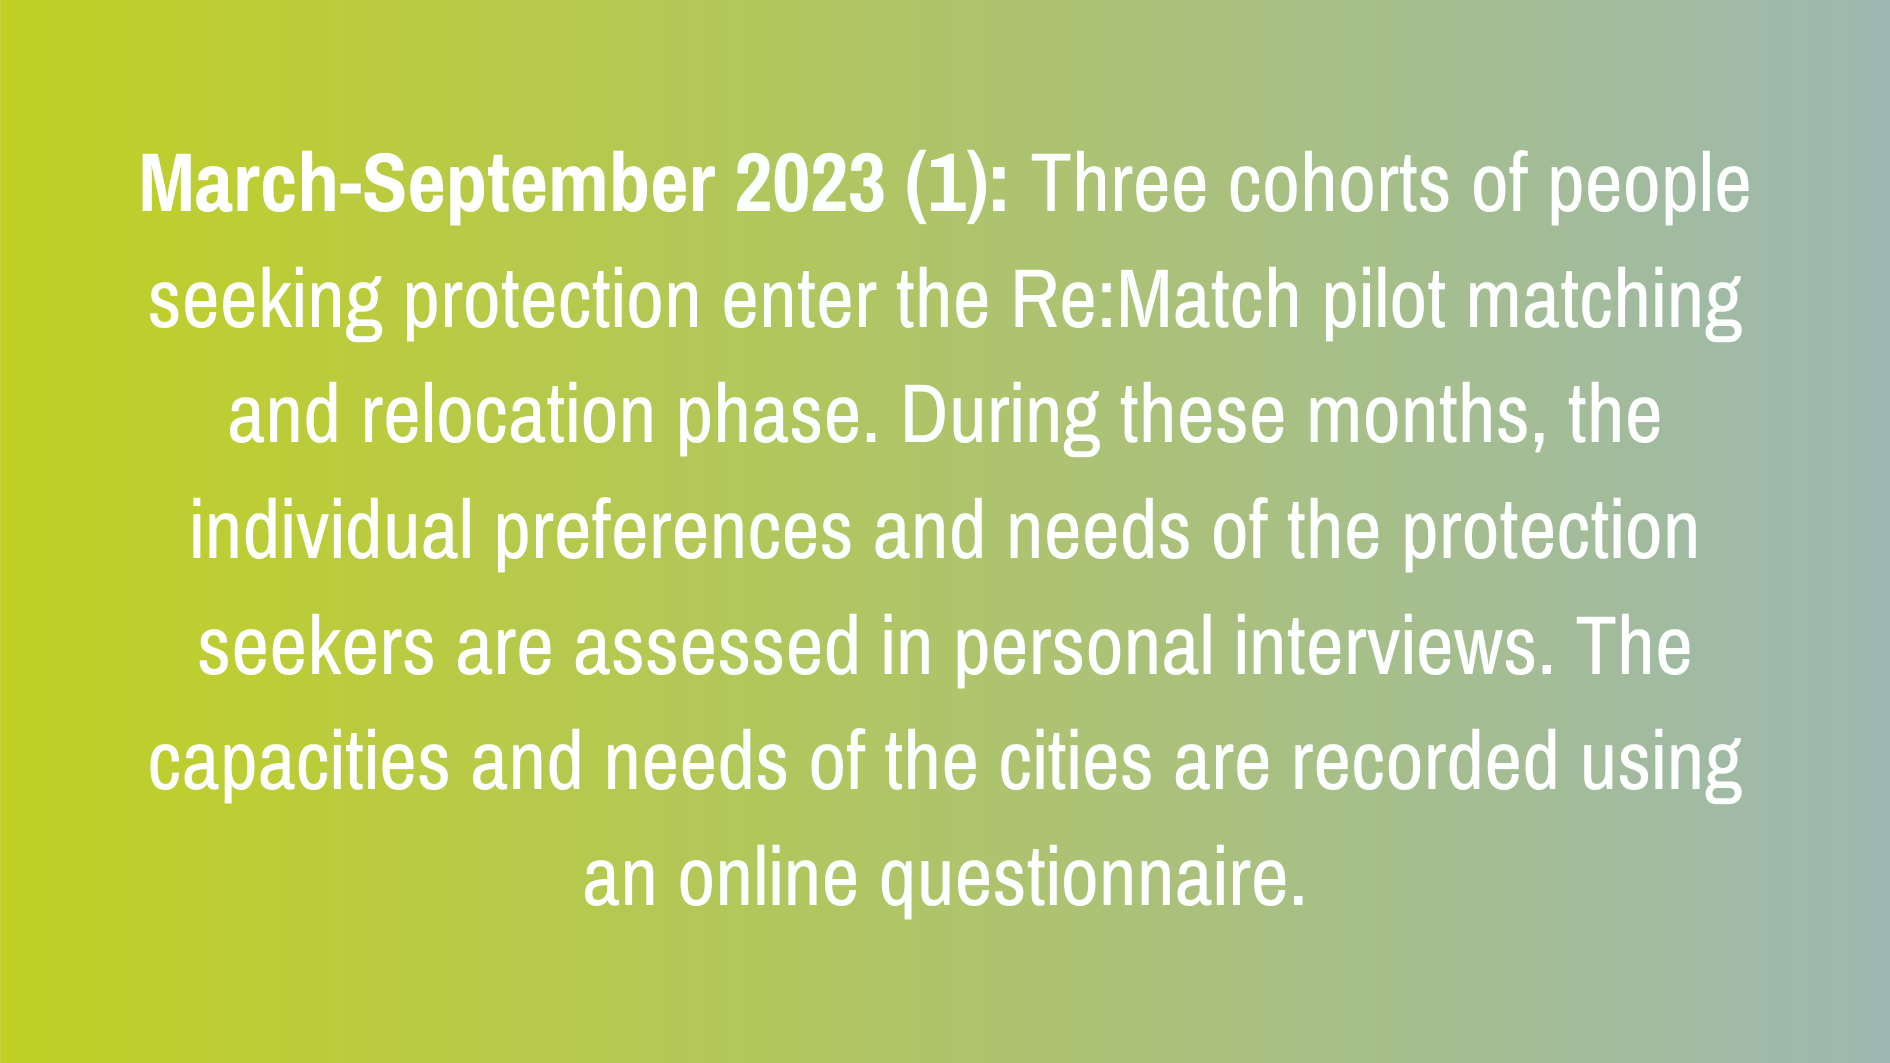 March-September 2023 (1): Three cohorts of people seeking protection enter the Re:Match pilot matching and relocation phase. During these months, the individual preferences and needs of the protection seekers are assessed in personal interviews. The capacities and needs of the cities are recorded using an online questionnaire.